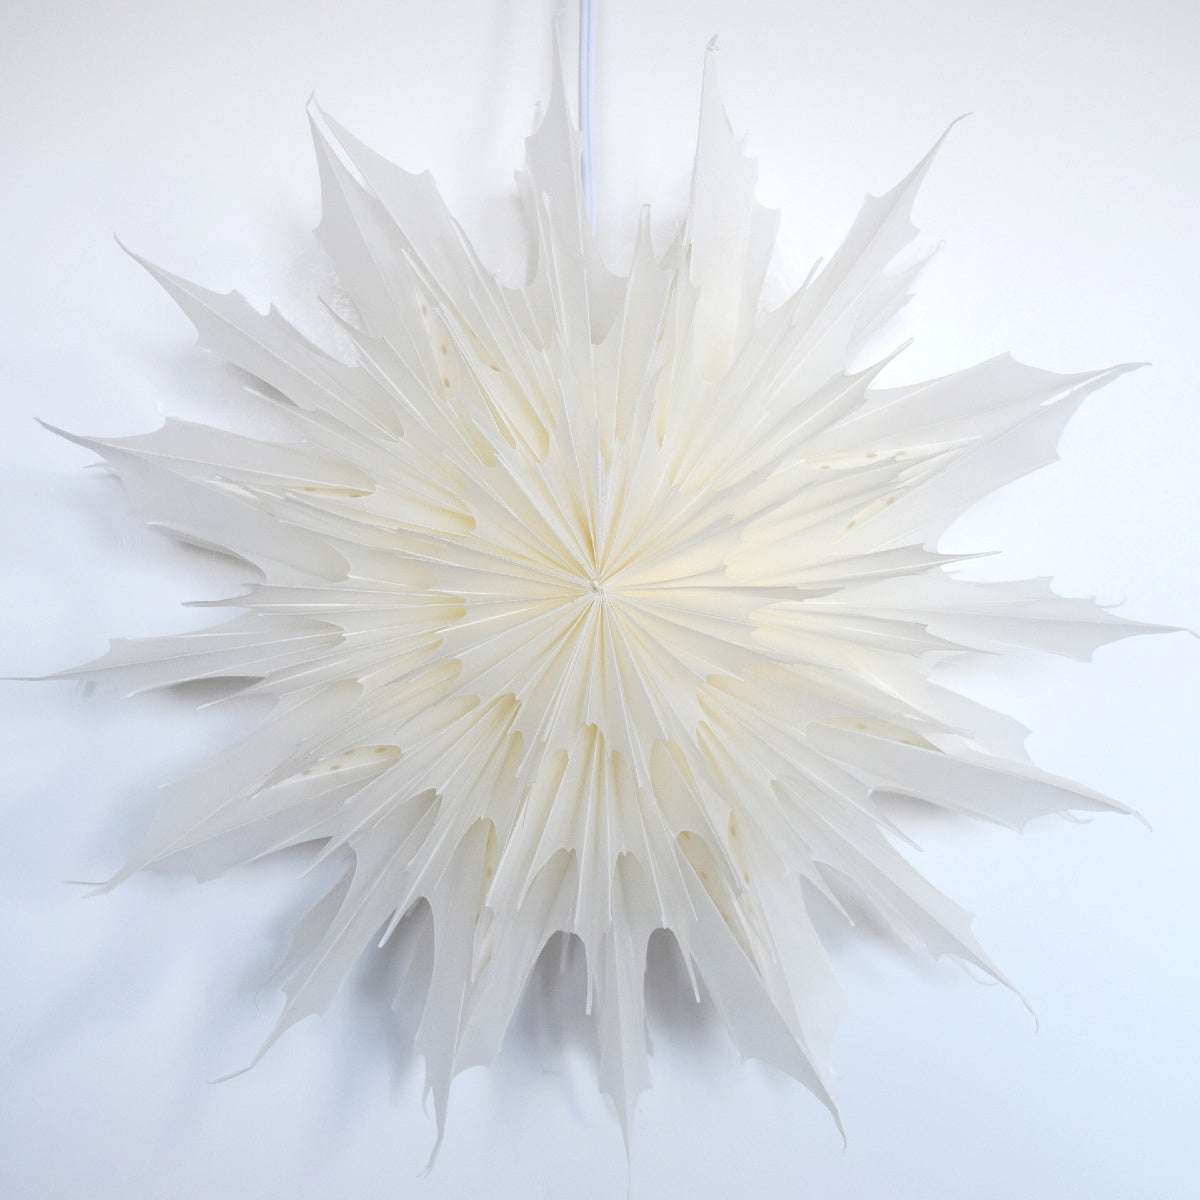 32&quot; White Sleet Snowflake Star Lantern Pizzelle Design - Great With or Without Lights - Ideal for Holiday and Snowflake Decorations, Weddings, Parties, and Home Decor